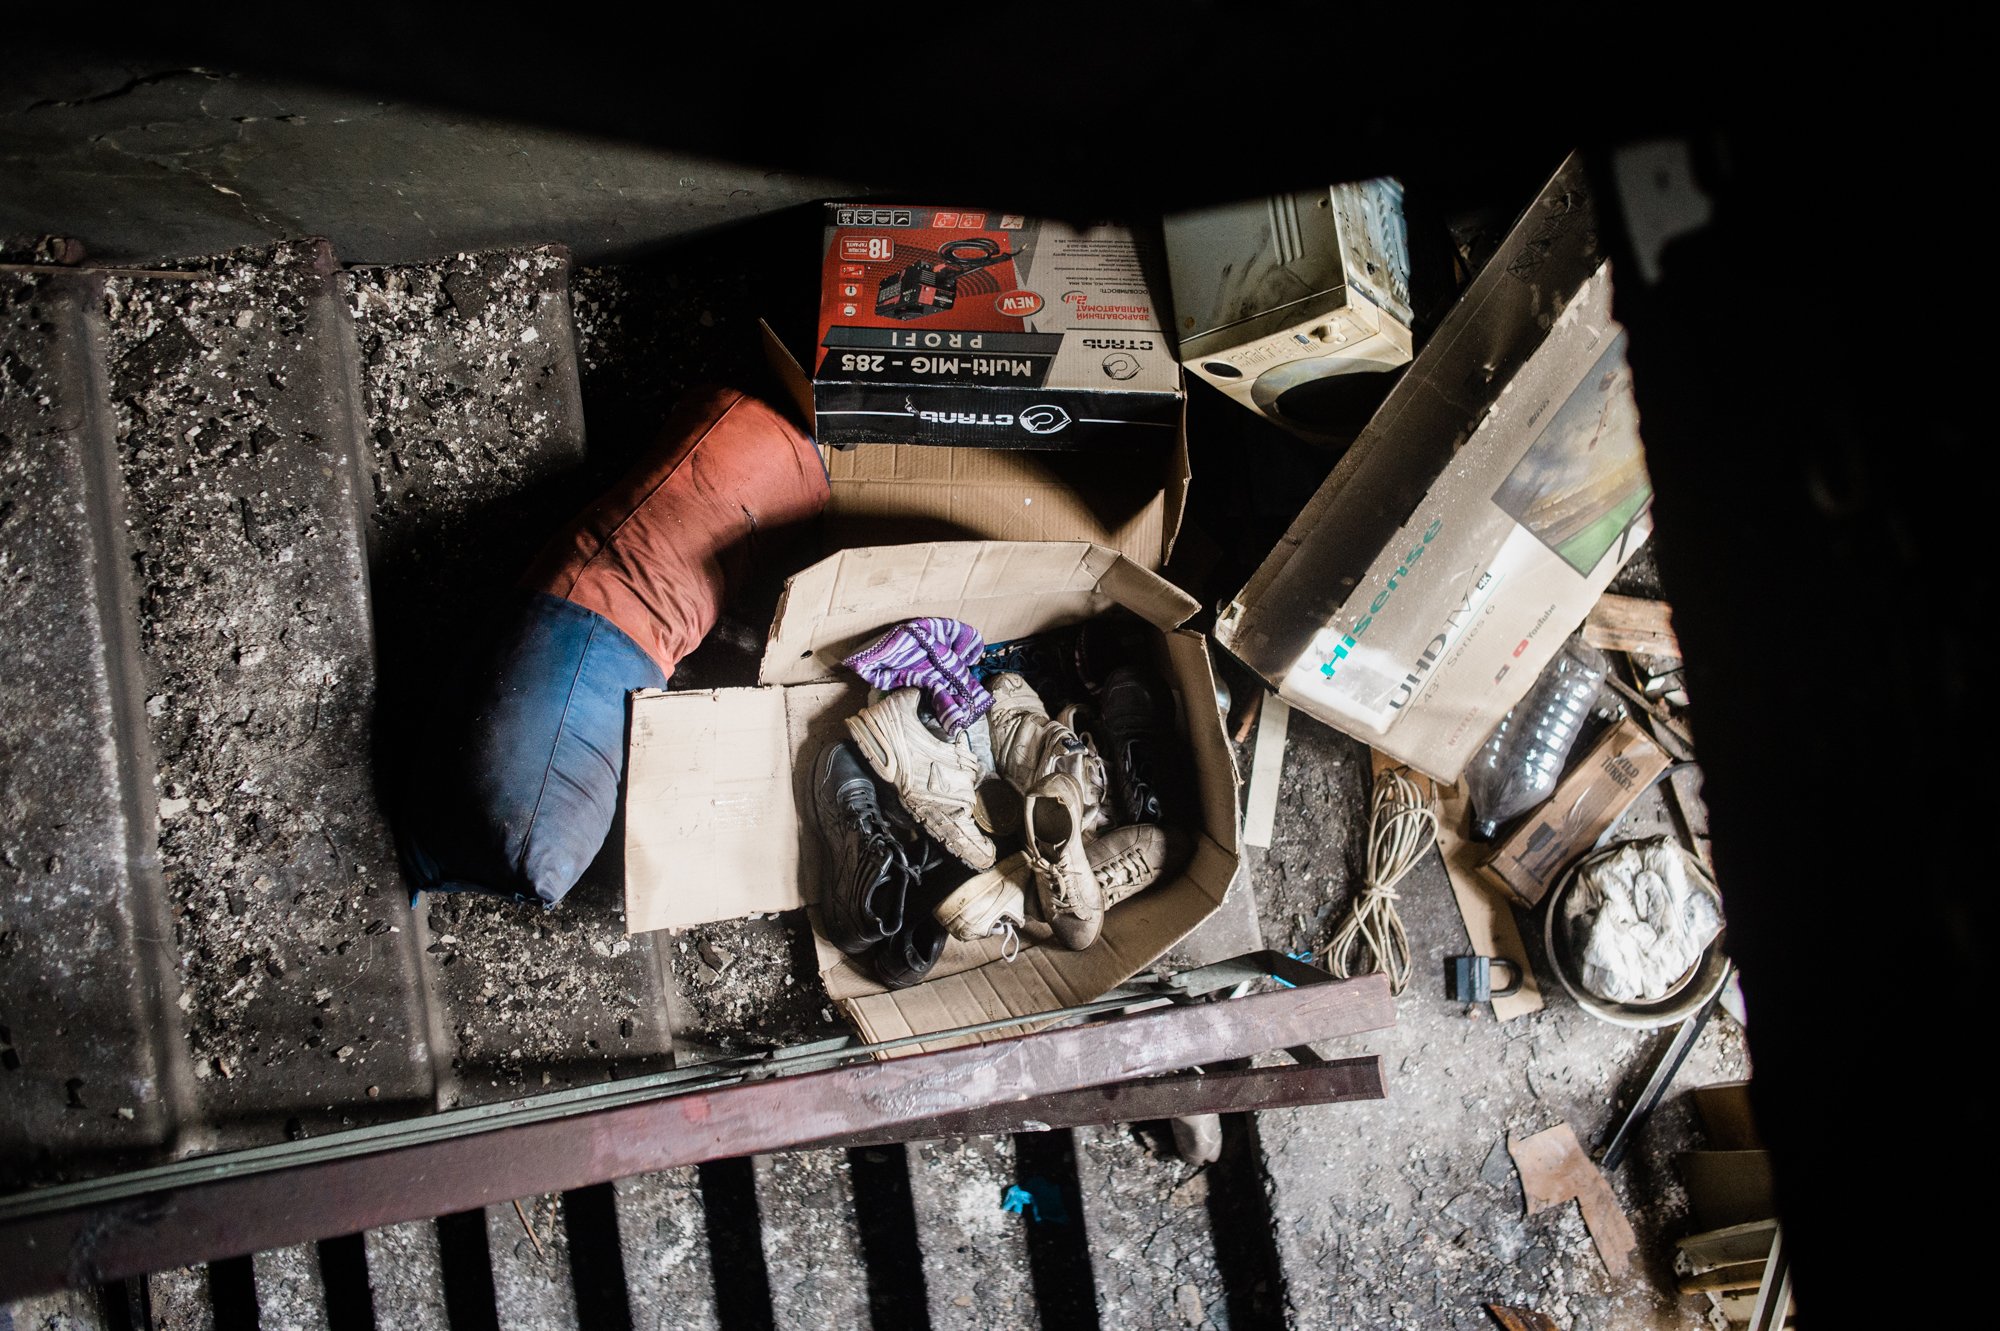  Belongings left behind inside a destroyed residential building in the Kyiv suburb of Irpin. 